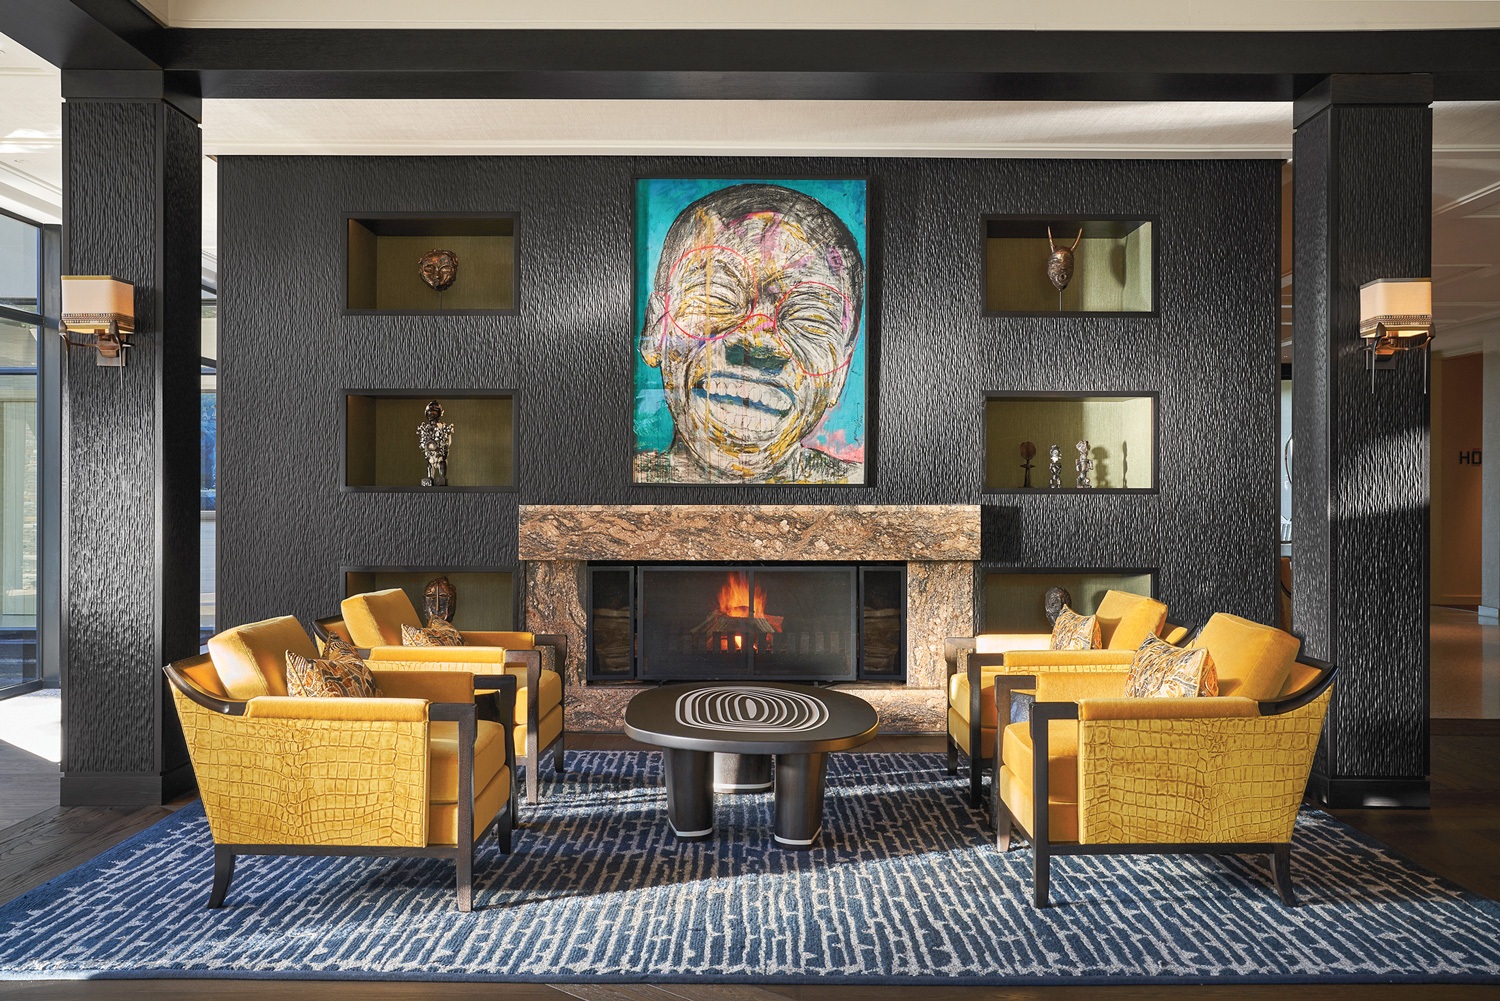 A Nelson Makamo artwork overlooks the renovated lobby at Delaire Graff Estate in South Africa.